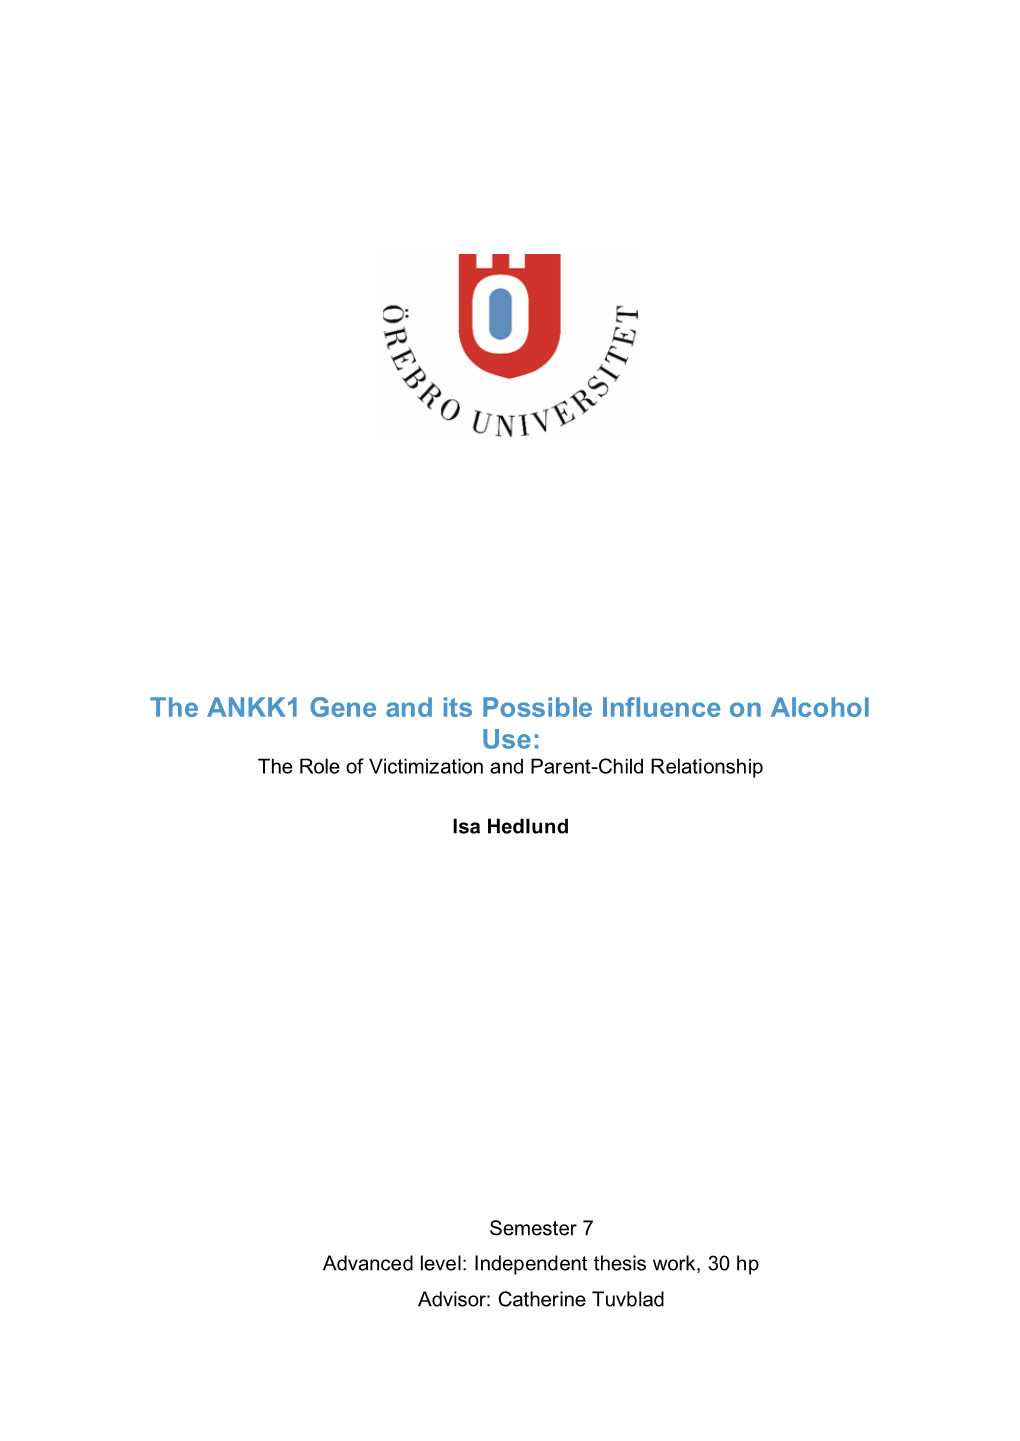 The ANKK1 Gene and Its Possible Influence on Alcohol Use: the Role of Victimization and Parent-Child Relationship